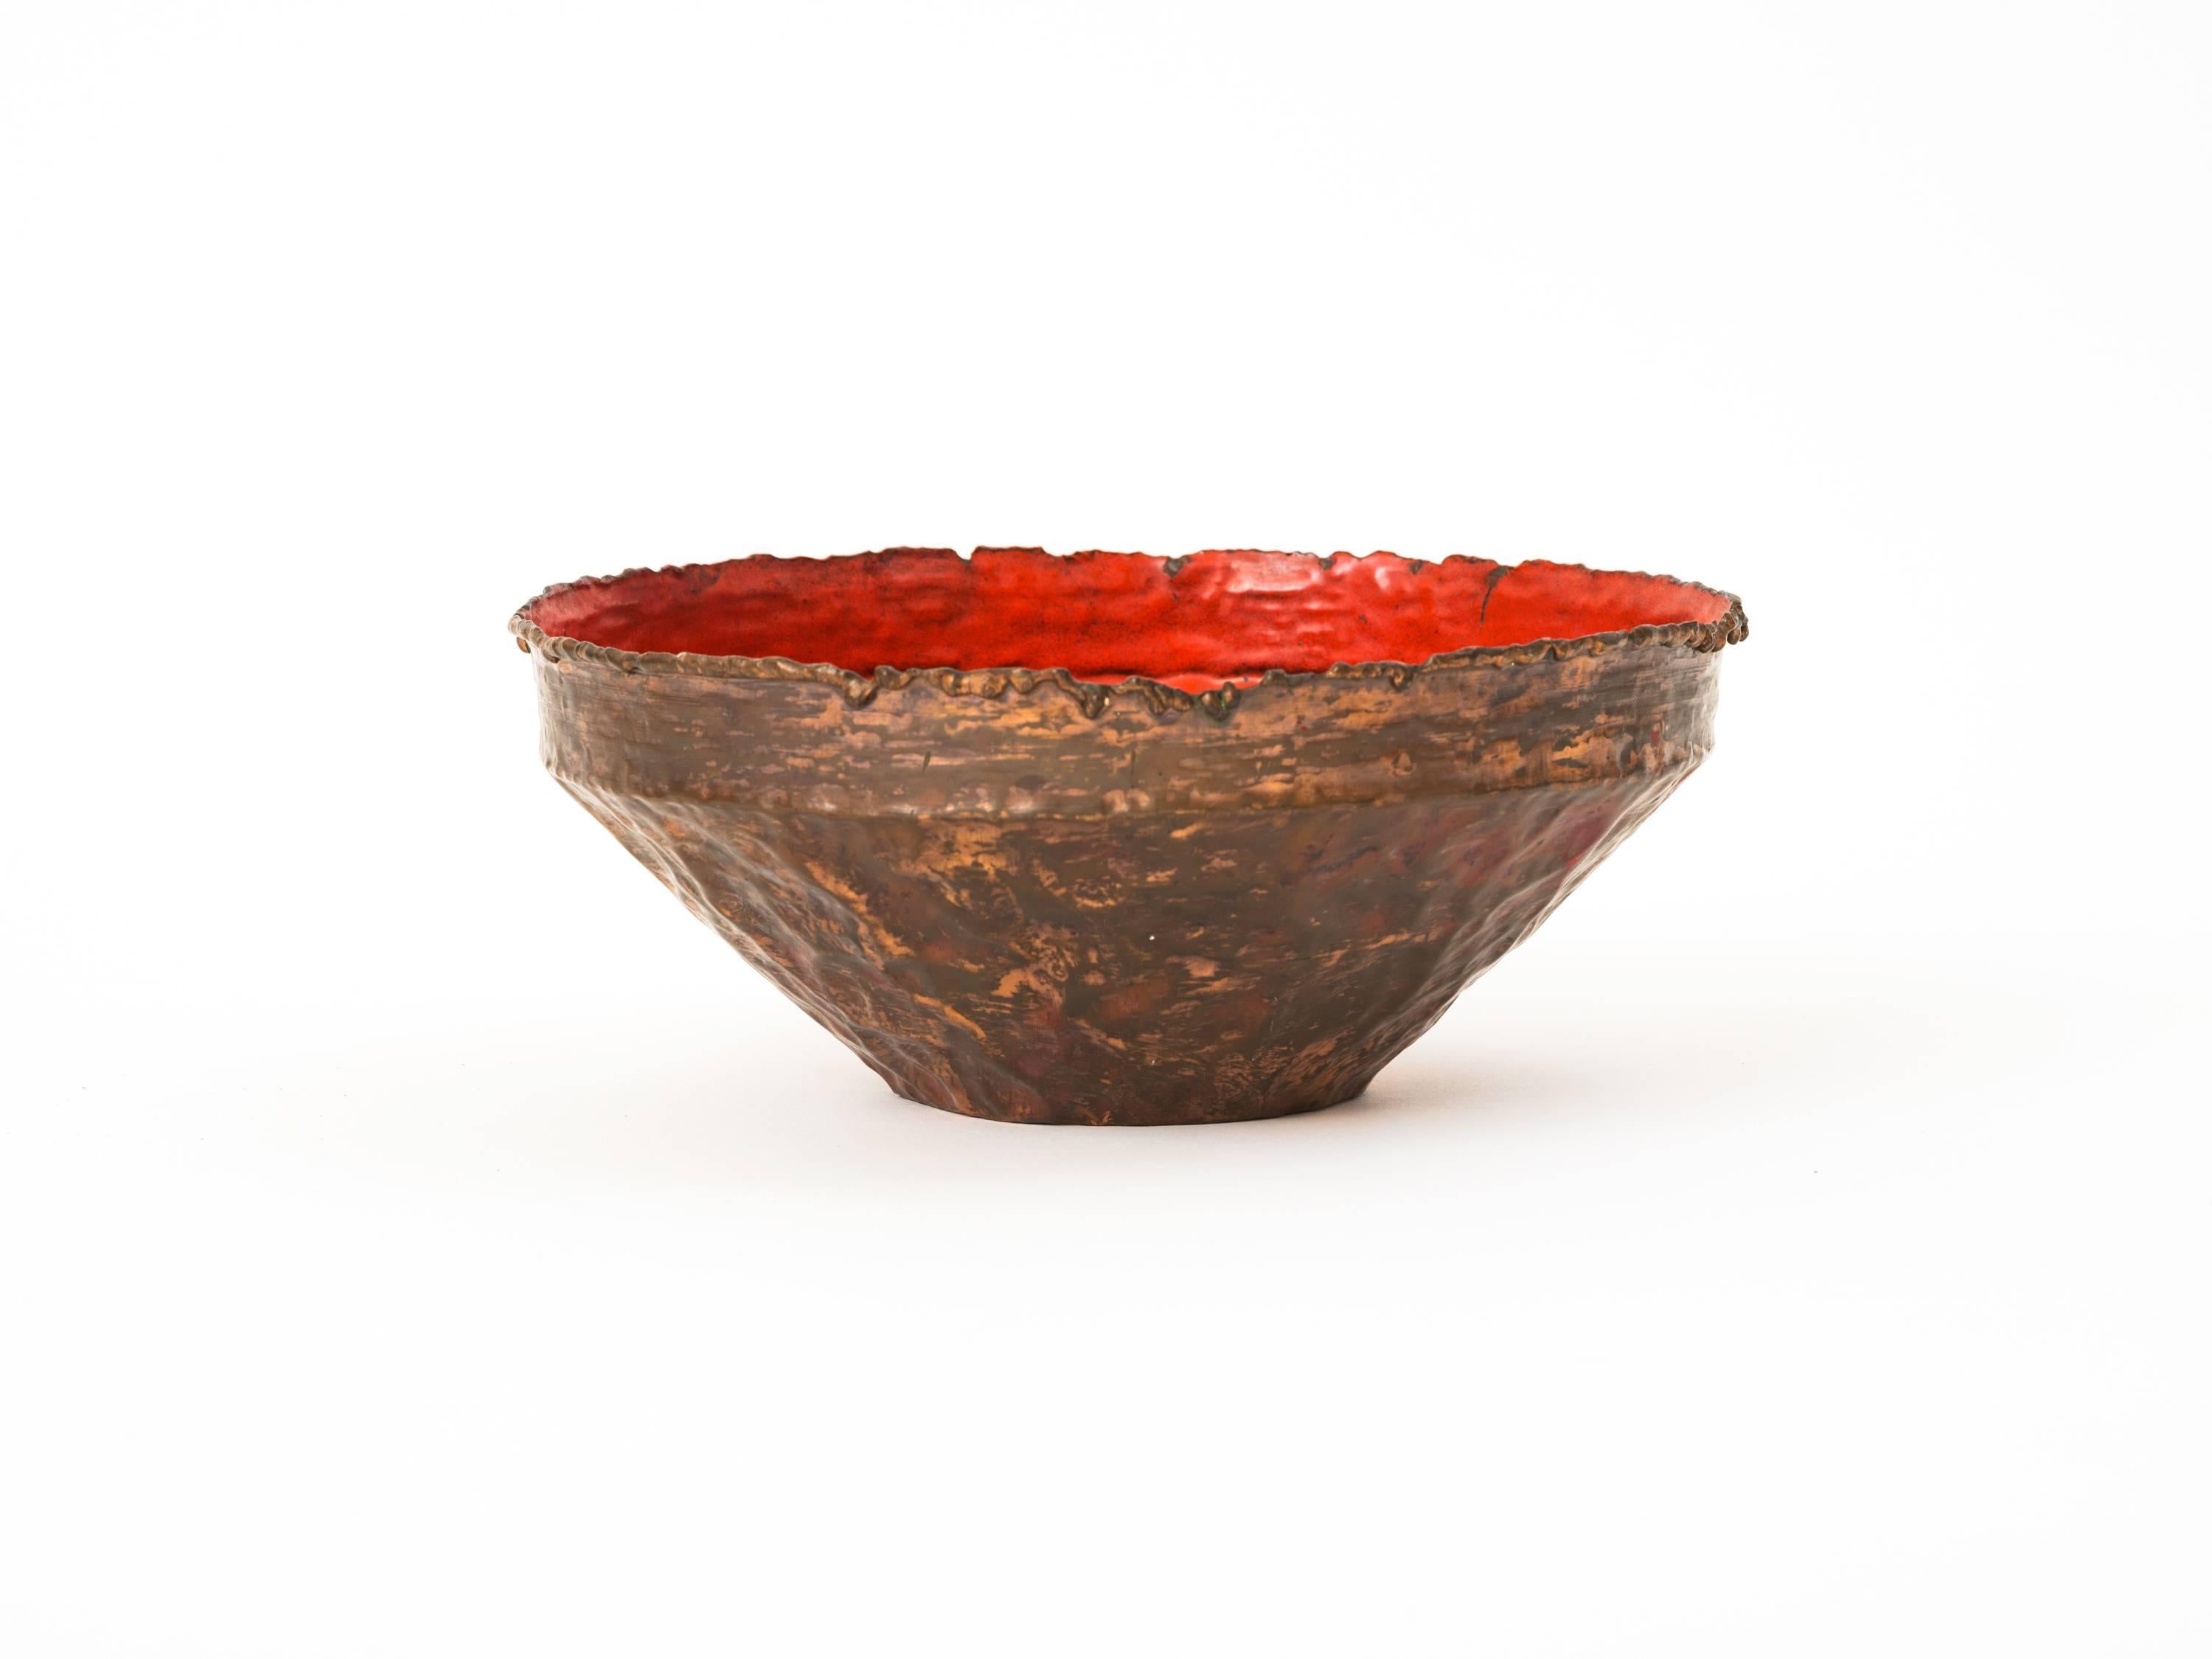 Decorative bowl in the Brutalist style, executed in handwrought copper with a torch-cut edge and a fiery-red enamel to the interior designed by Marcello Fantoni and imported by Raymor. A visually-arresting and tactile design object. Embossed to the